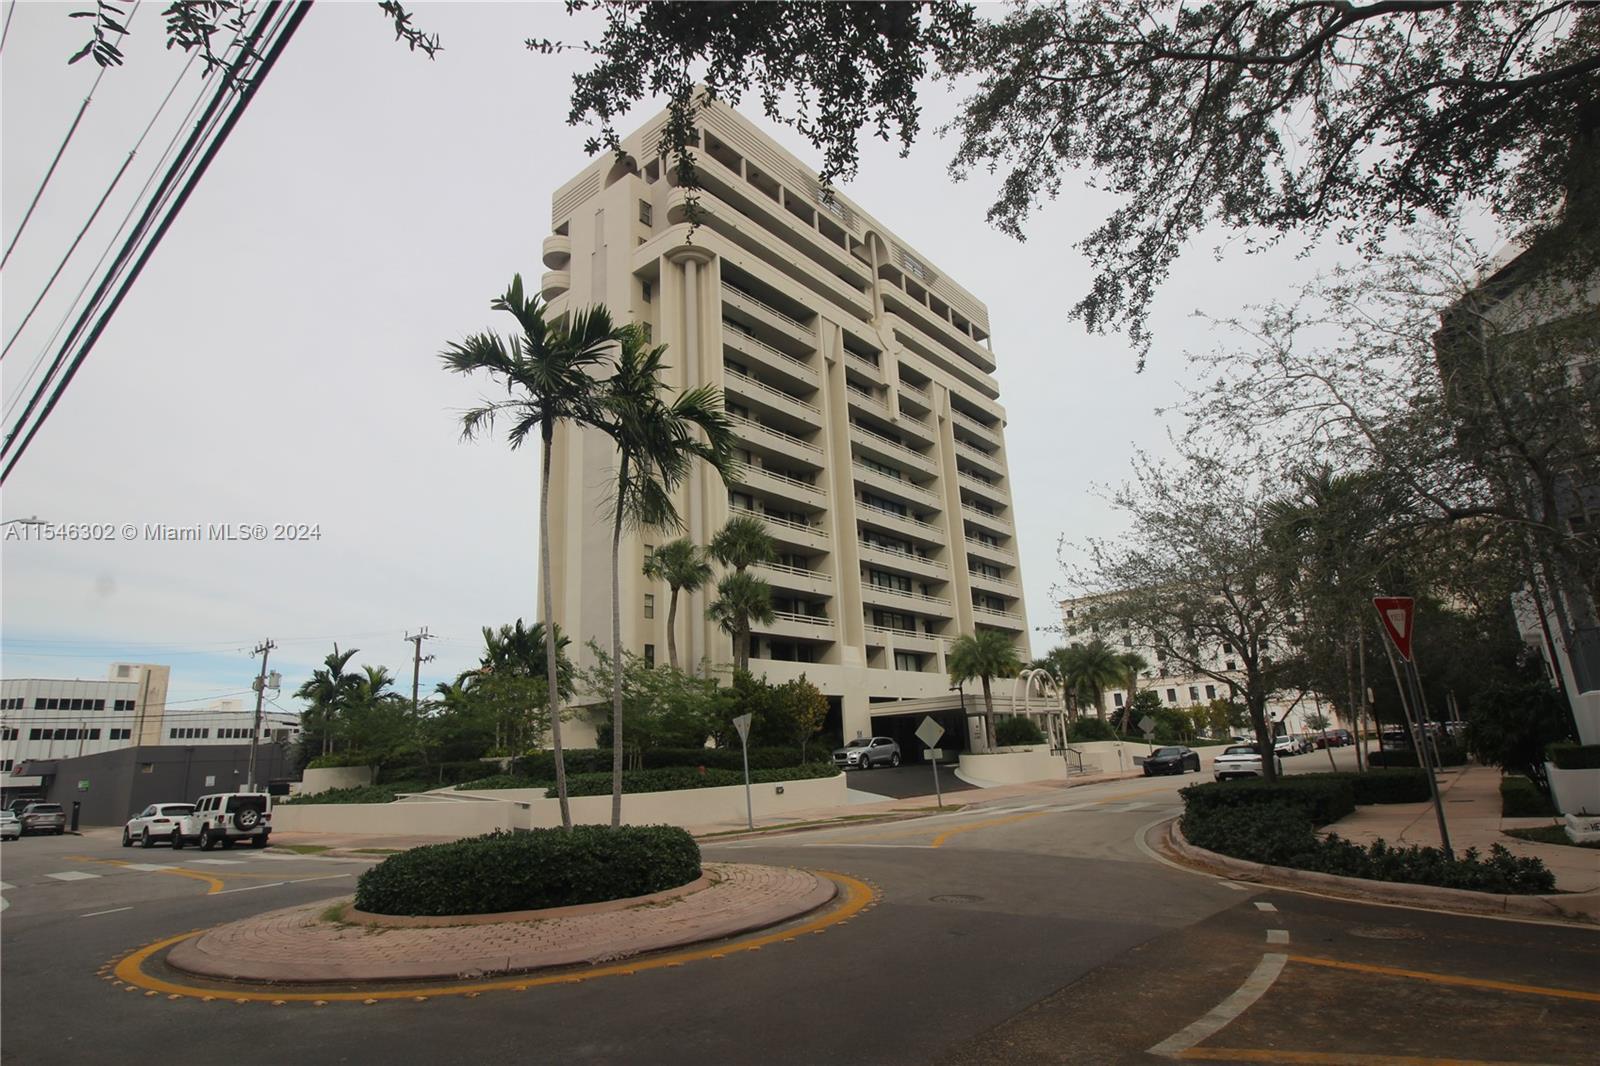 Photo of 441 Valencia Ave #202 in Coral Gables, FL